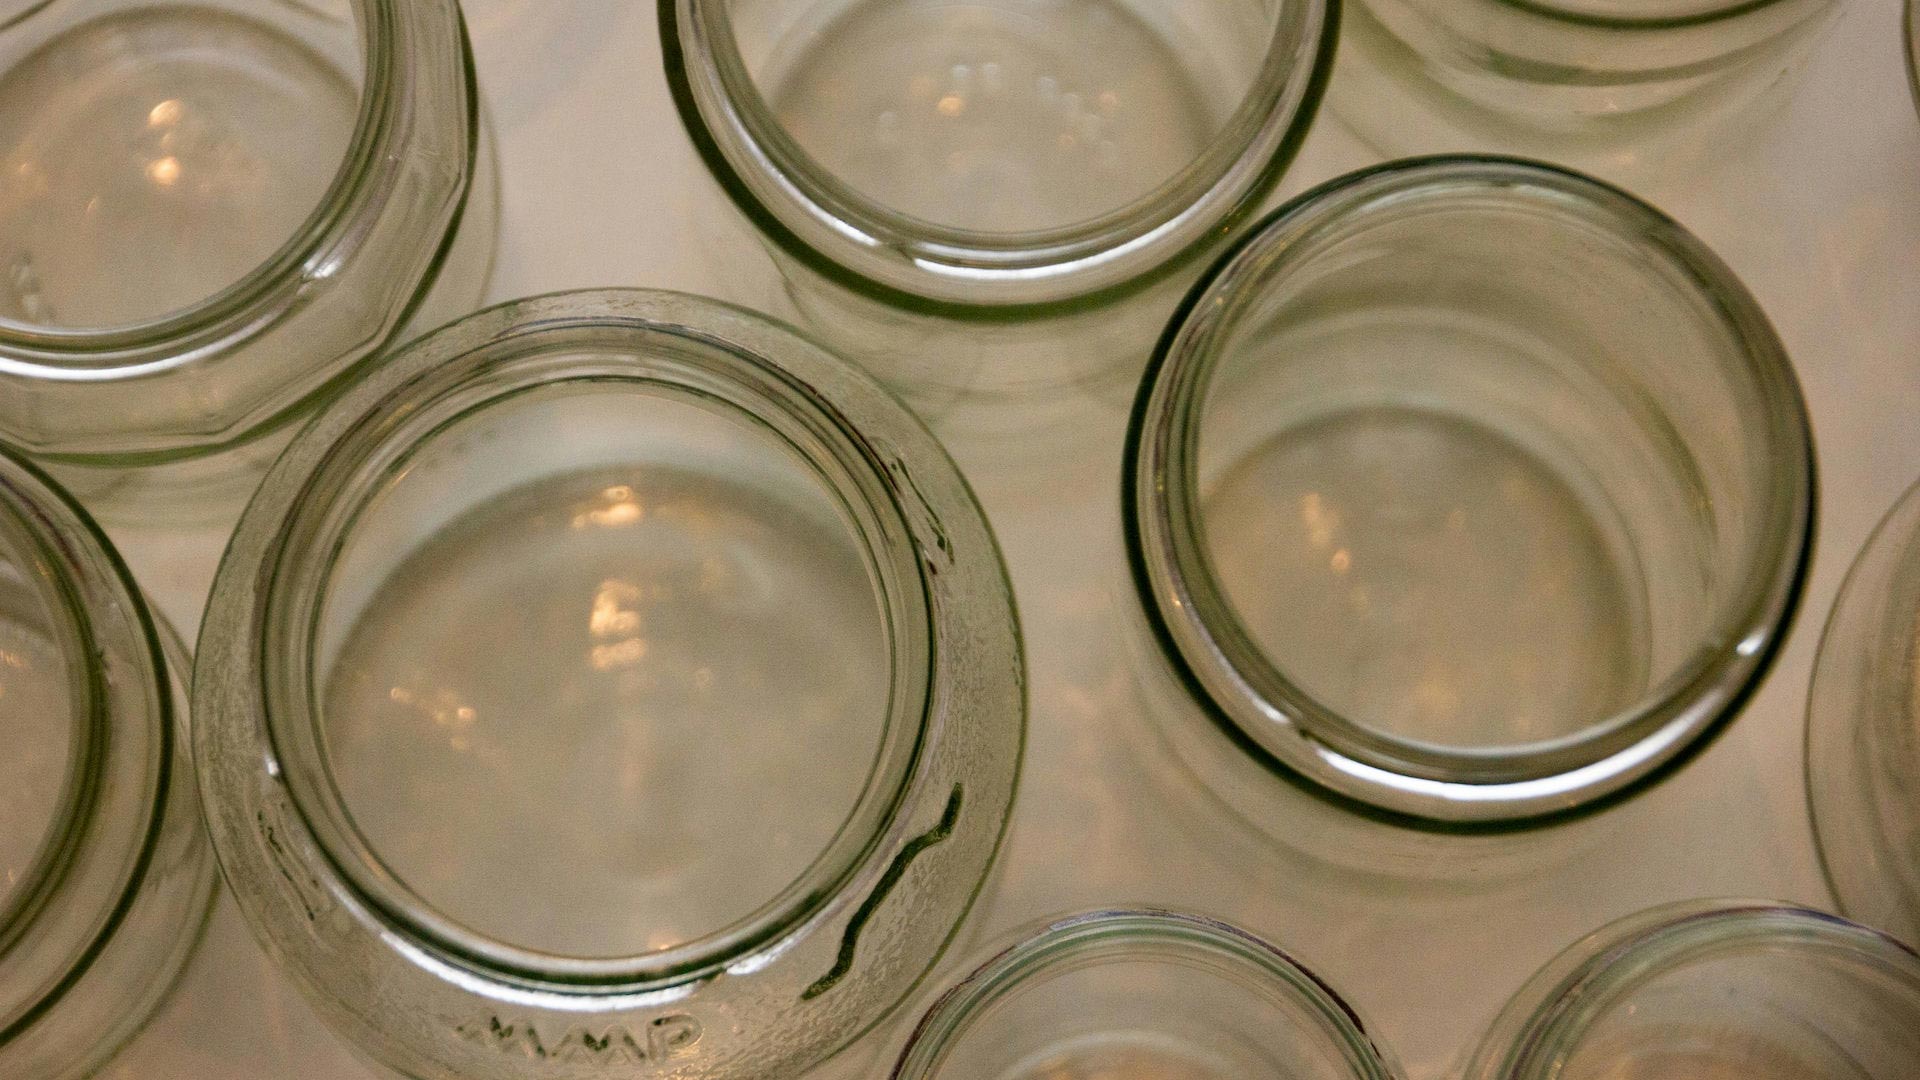 topside view of multiple empty glass jars